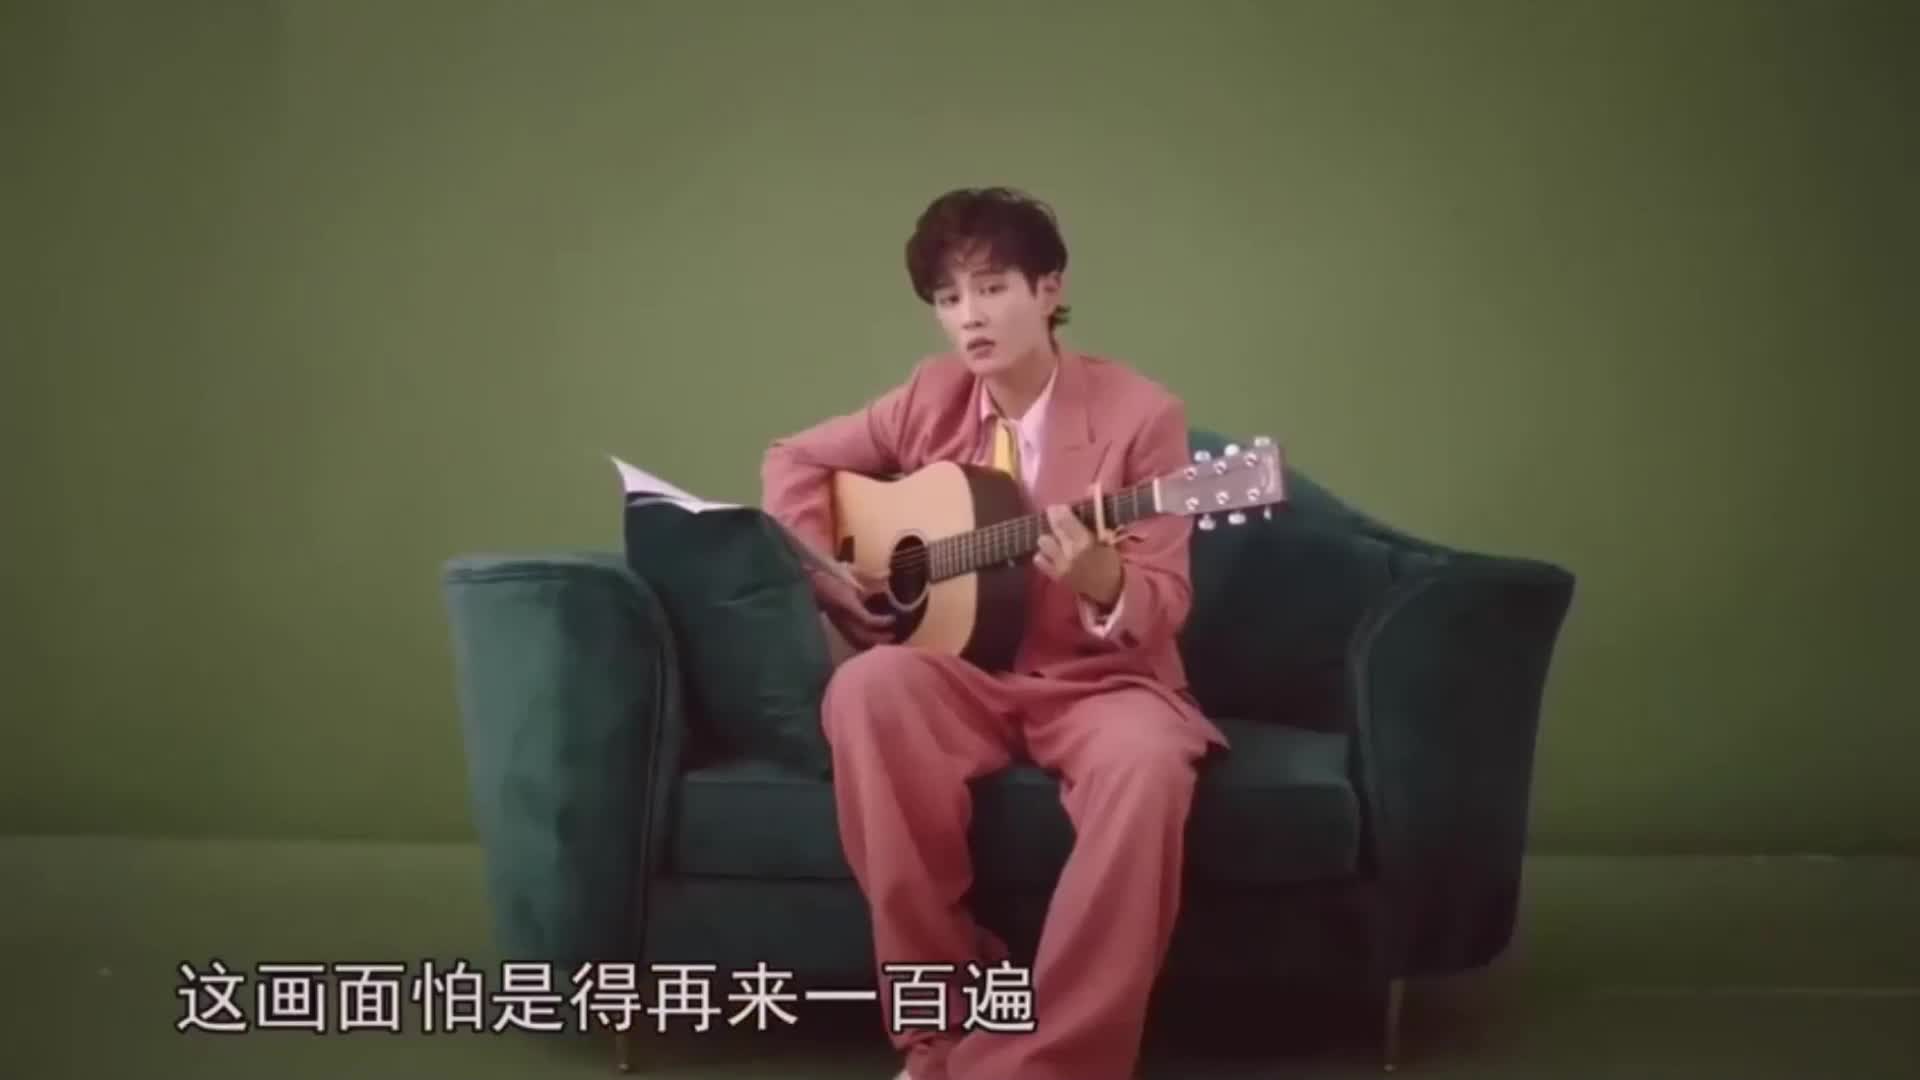 Li Wenhan is fond of singing "Just Once" as a gift on July Eve. It's too warm.